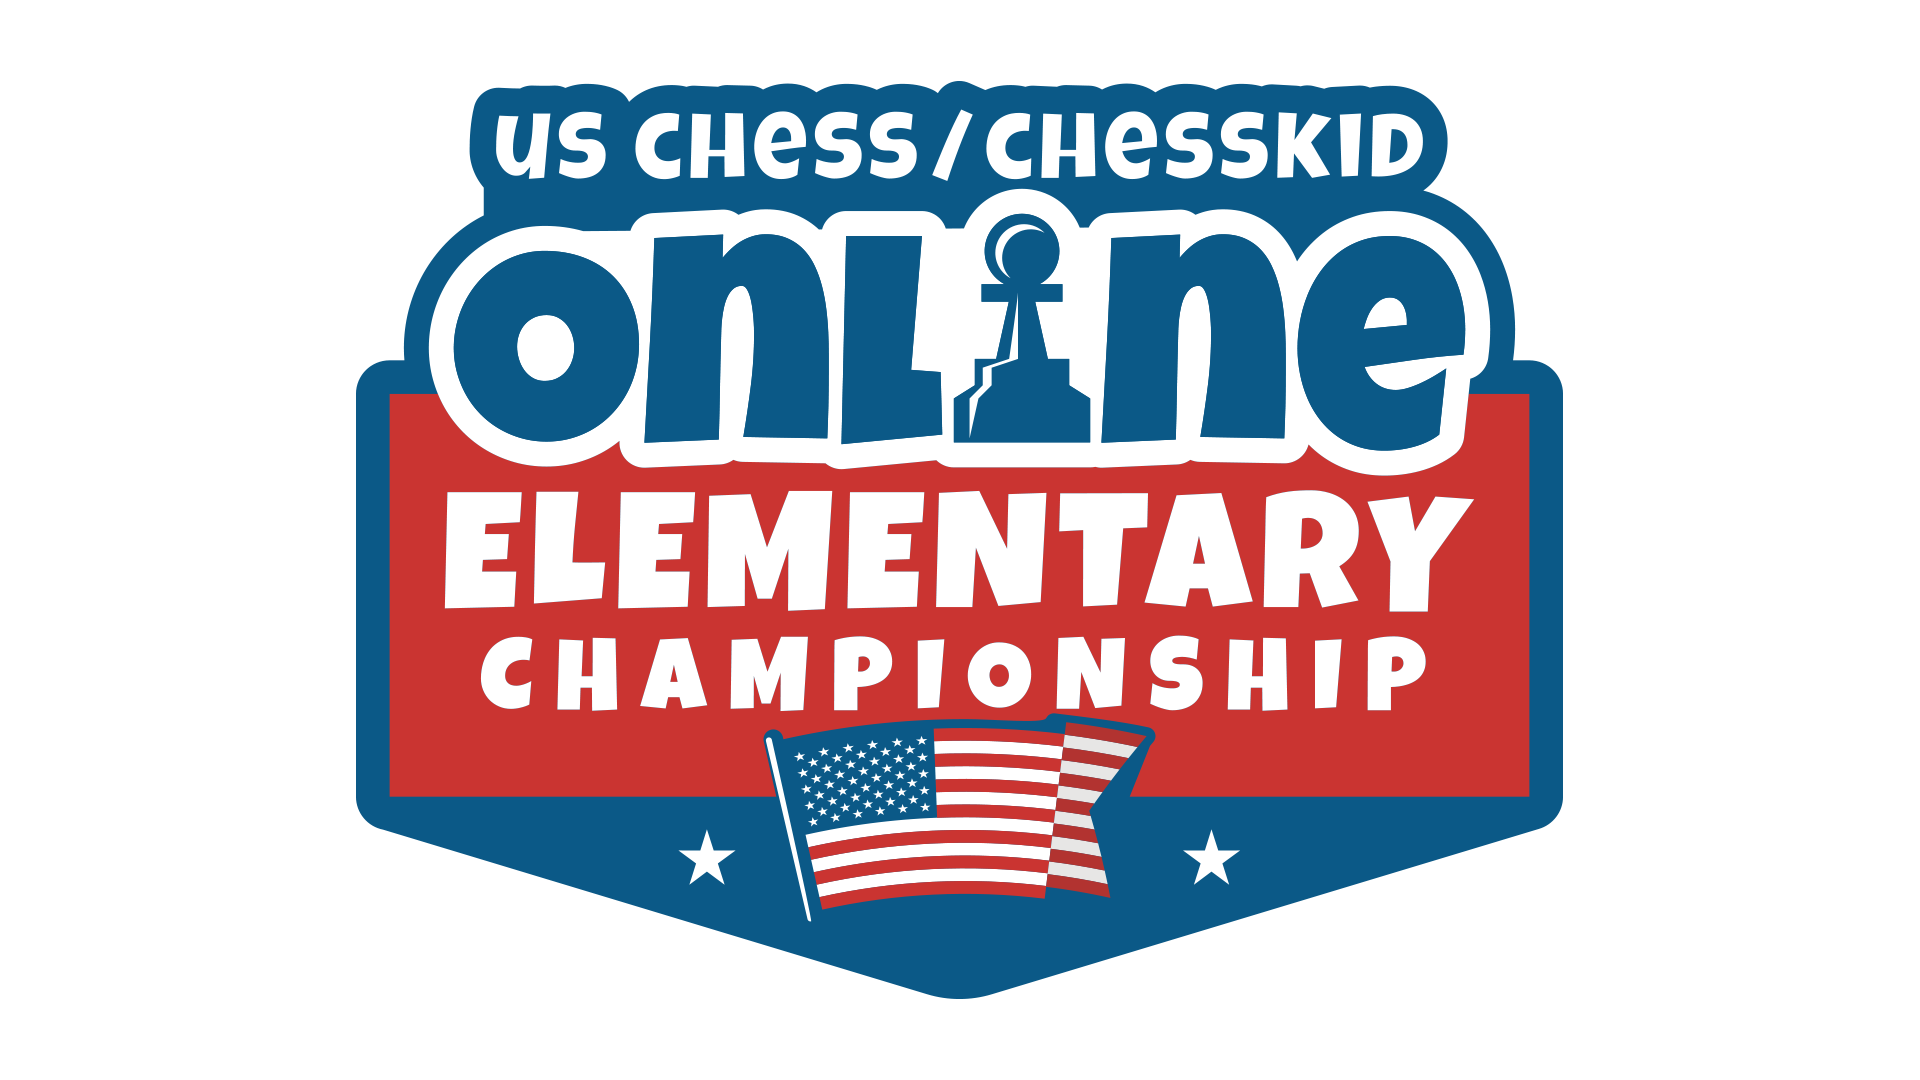 US Chess / ChessKid Online Elementary Championship Winners Released